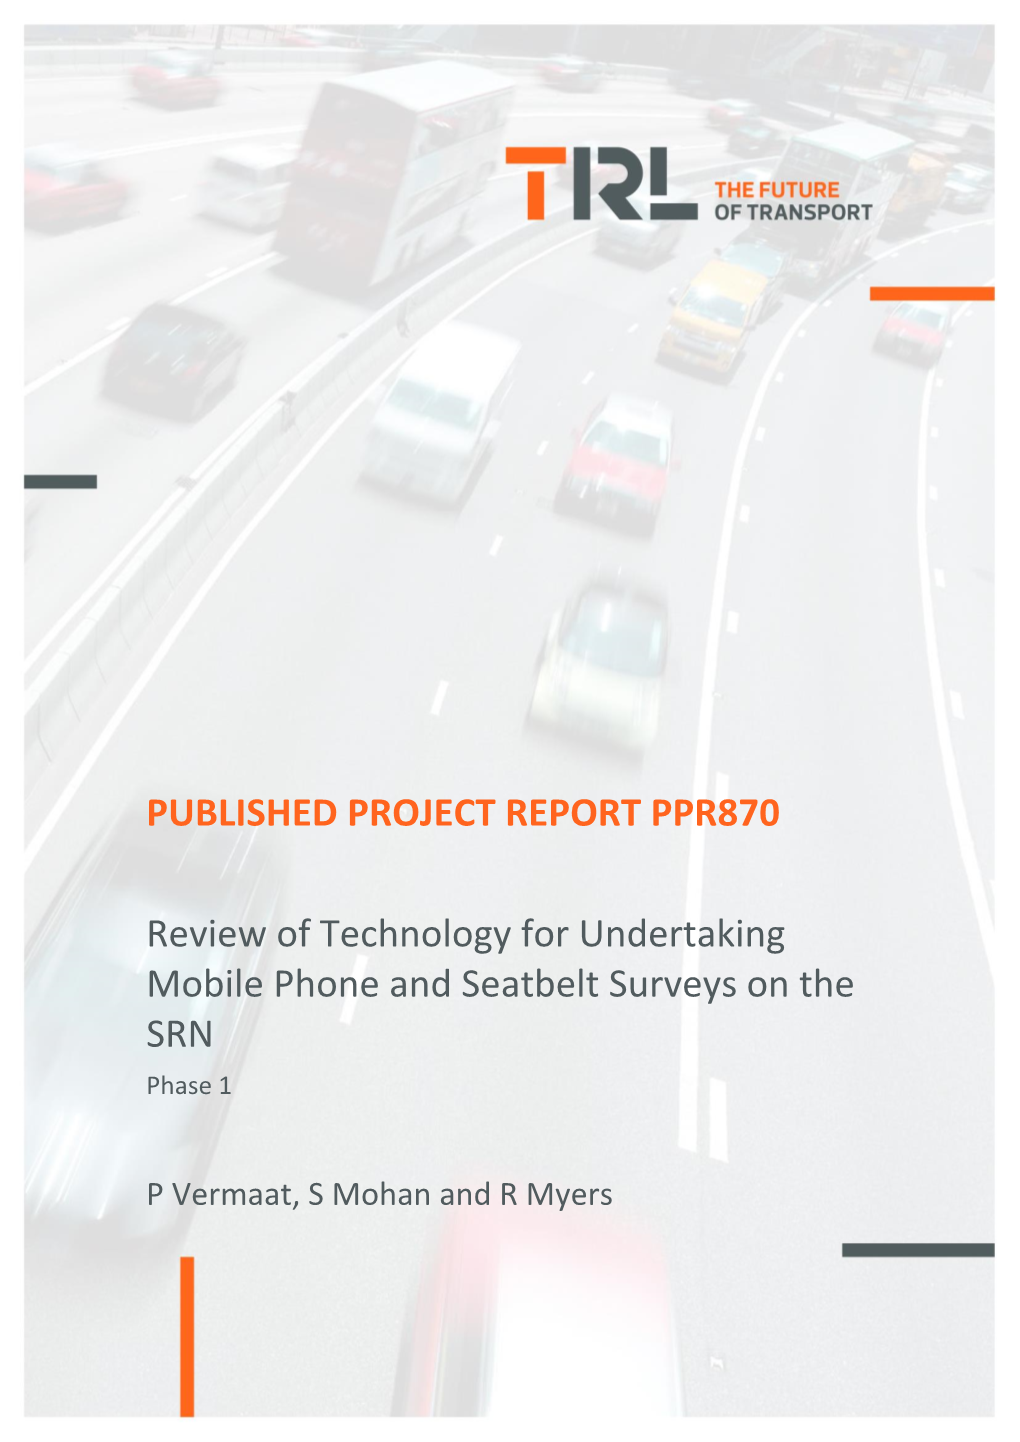 Mobile Phone Signal Detection 29 7.1 Assessment Against Evaluation Criteria 29 7.2 Relevant Technology Trends 30